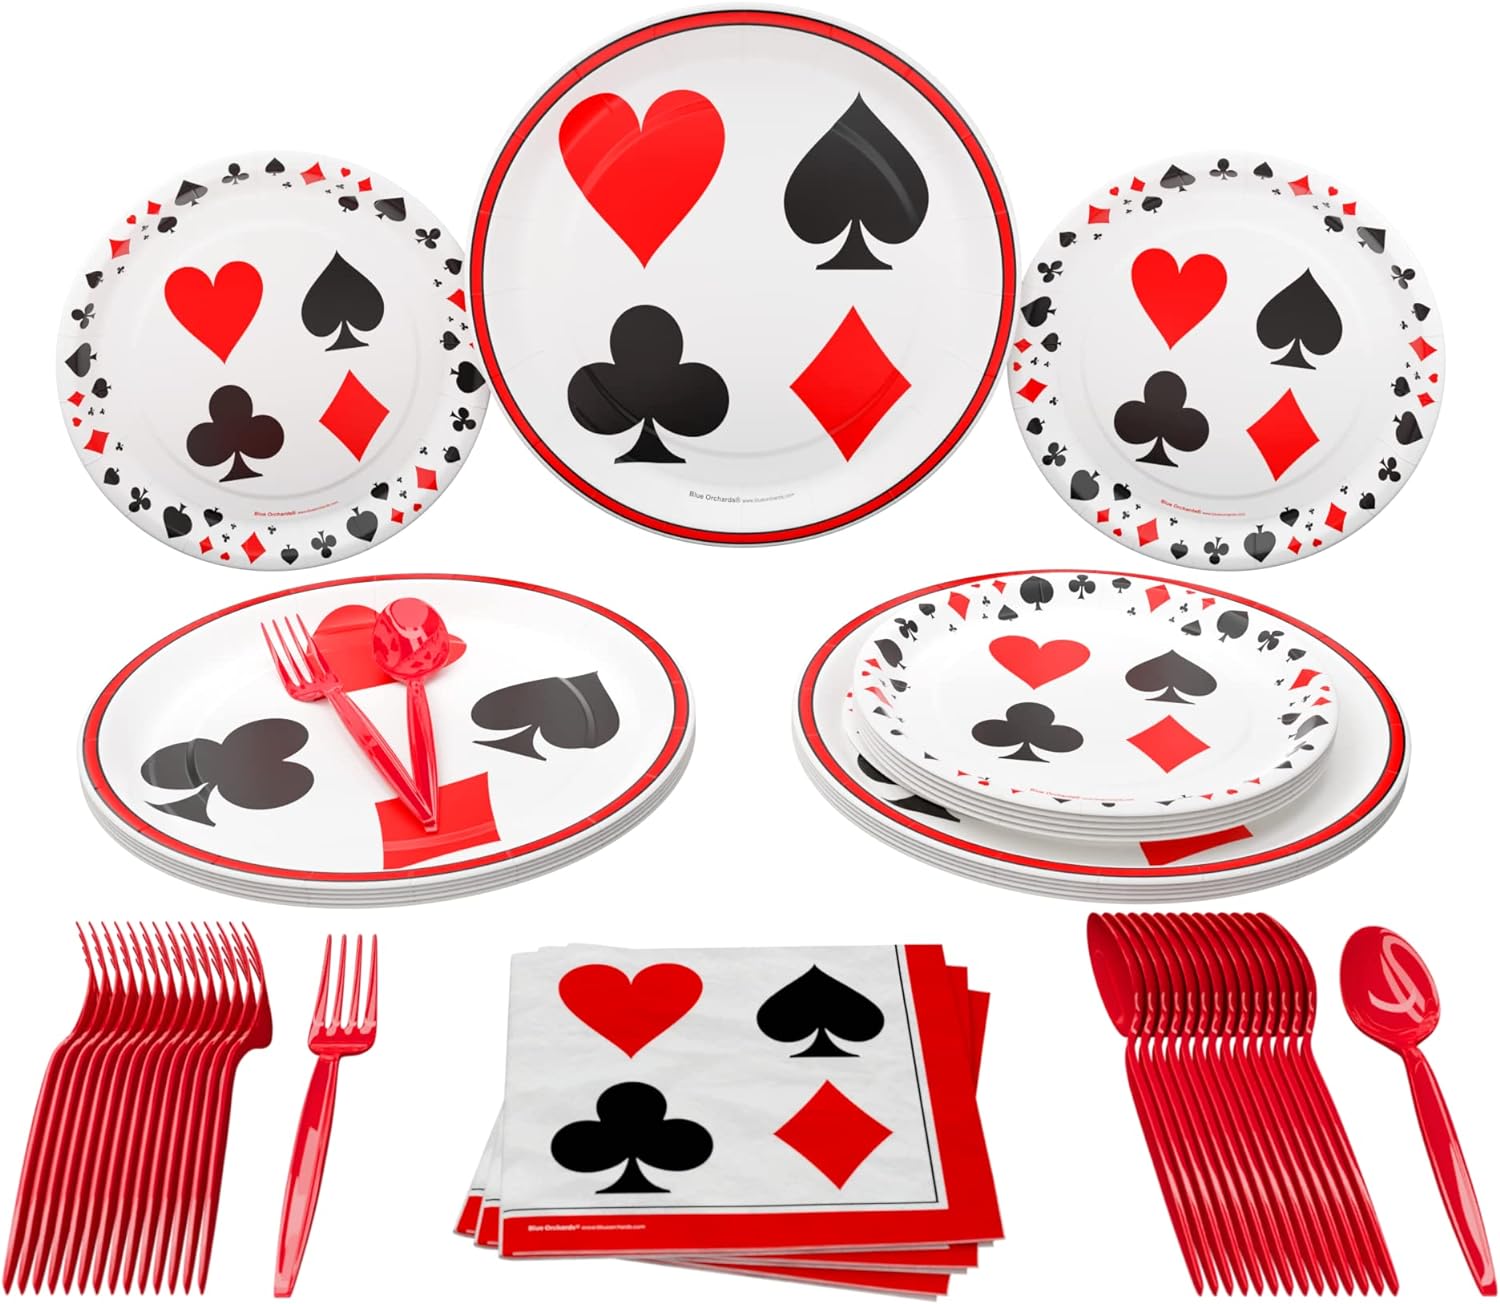 Casino Party Supplies Packs (For 16 Guests)